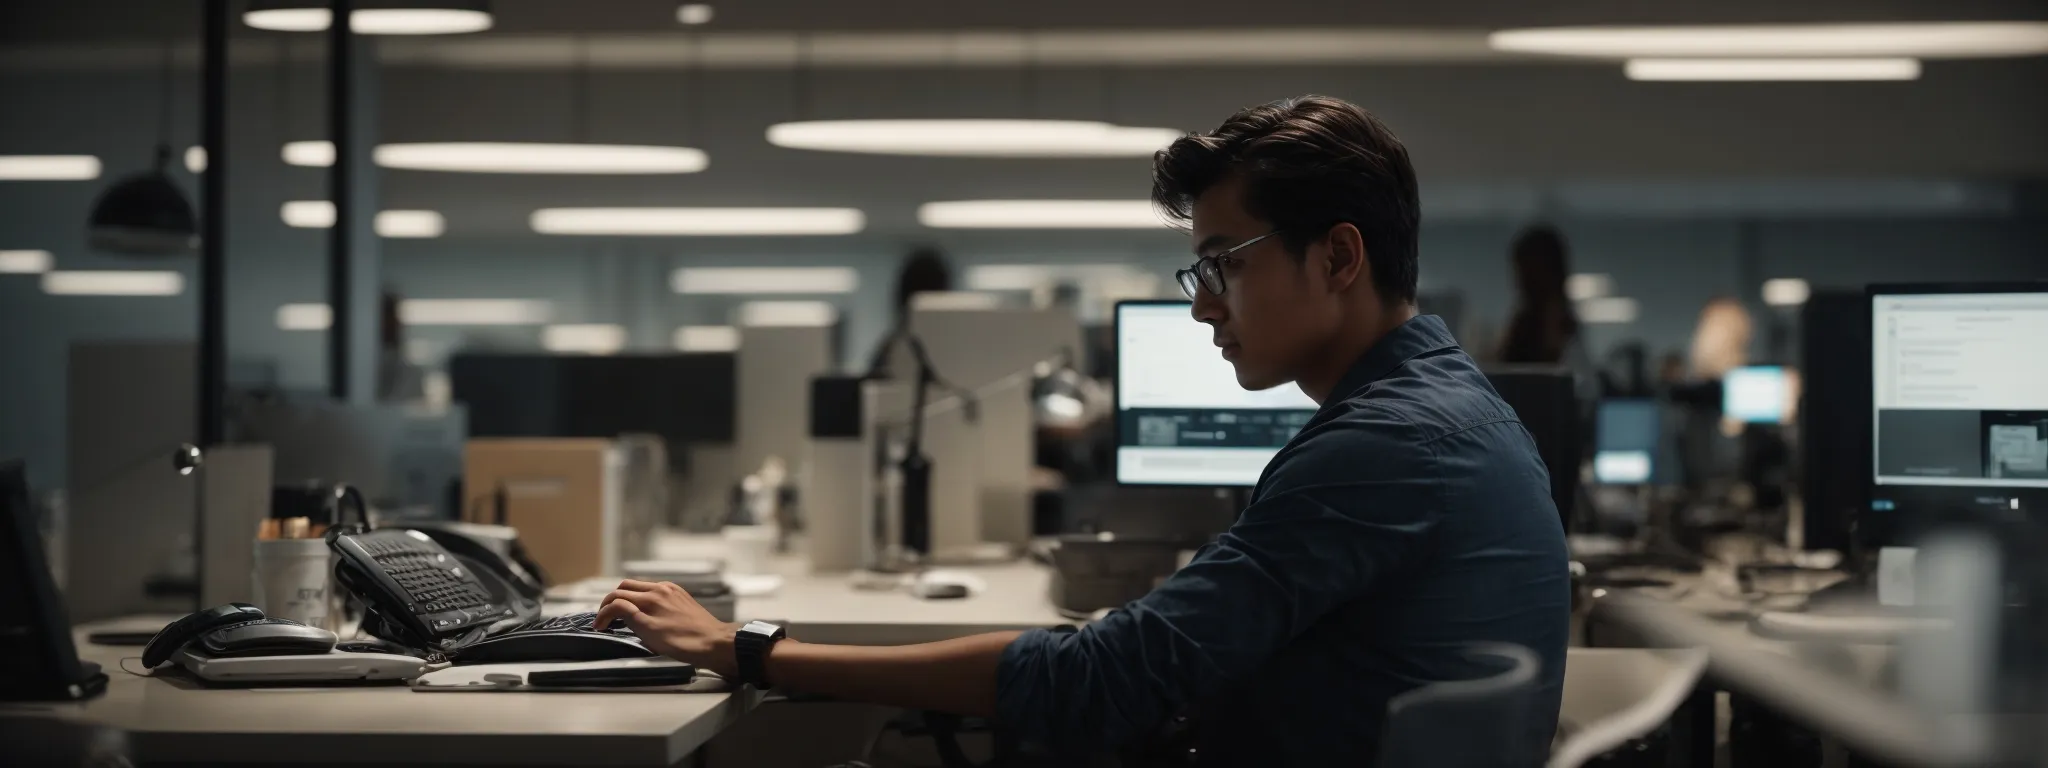 a focused individual typing at a computer in a well-lit, modern office space, symbolizing the meticulous crafting of optimized web content.